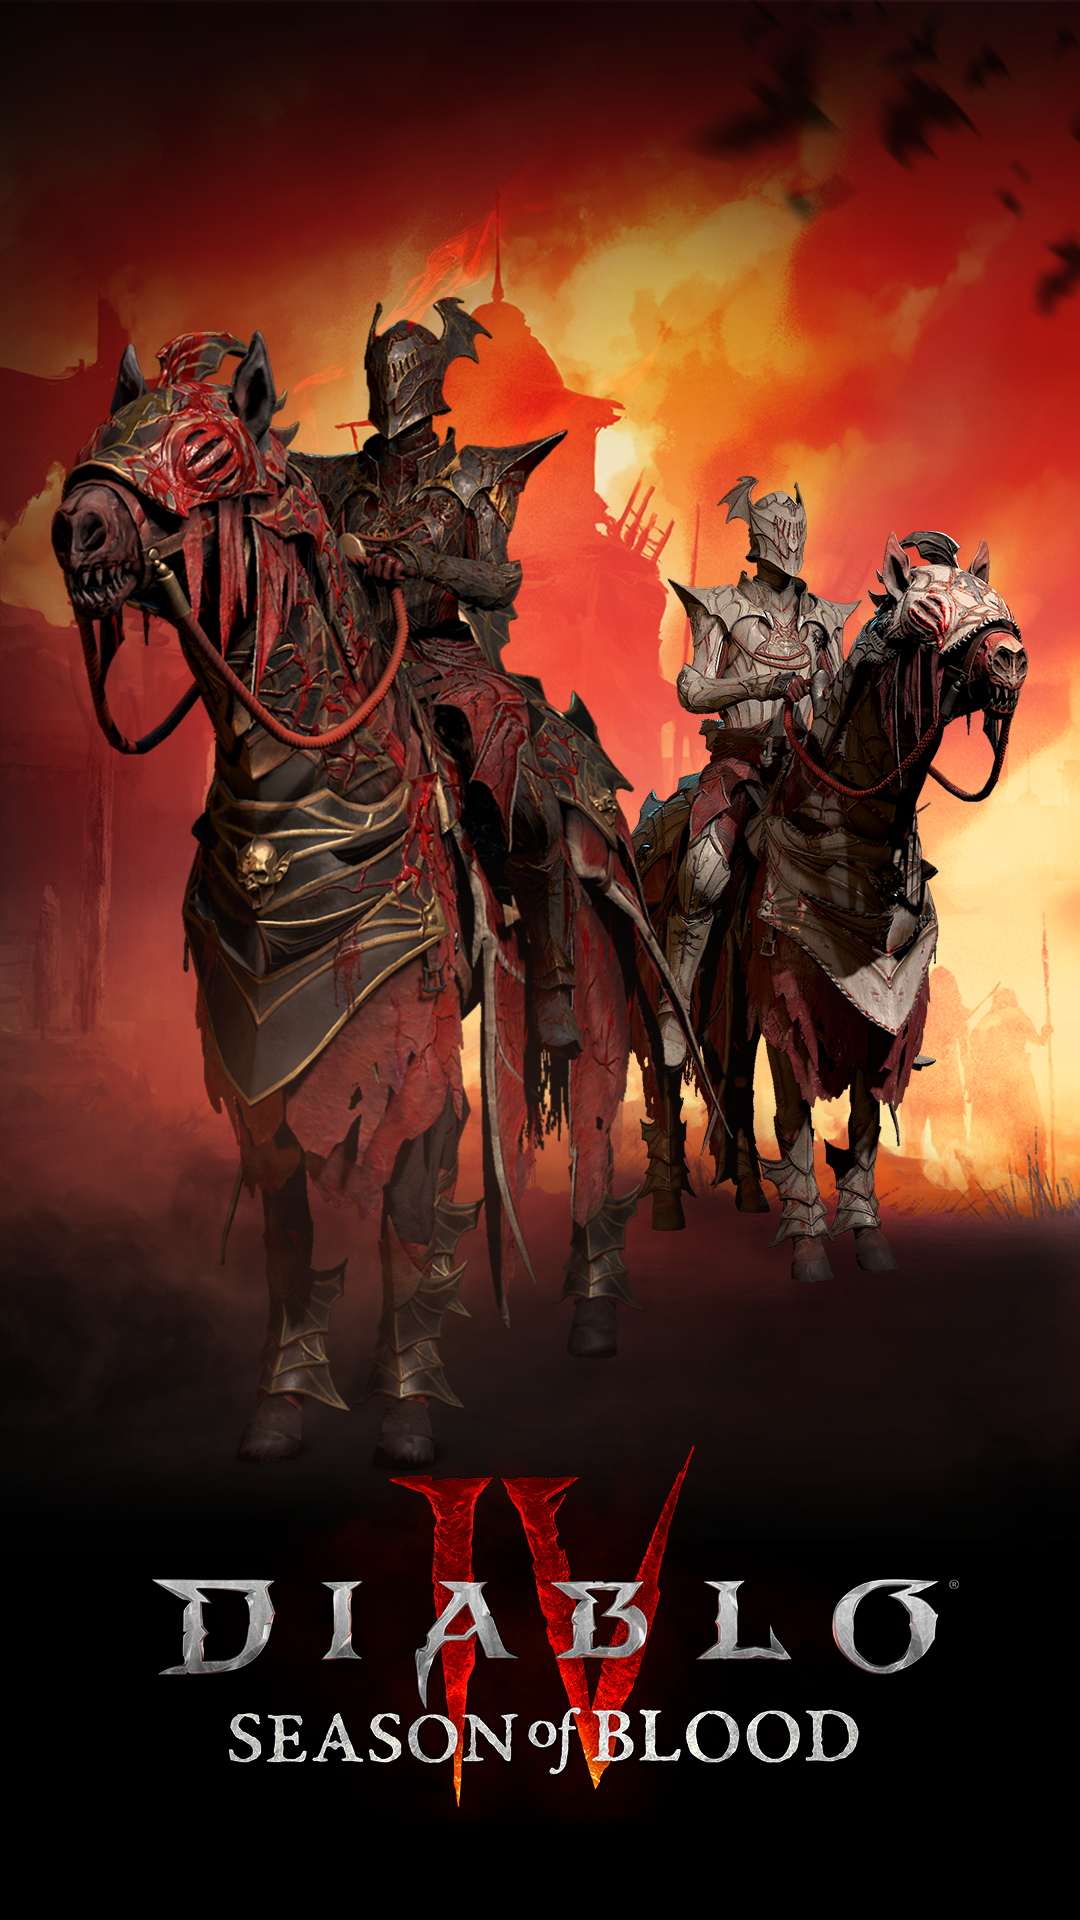 Diablo IV Season of Blood phone wallpaper featuring ominous character silhouettes on a red and black backdrop.